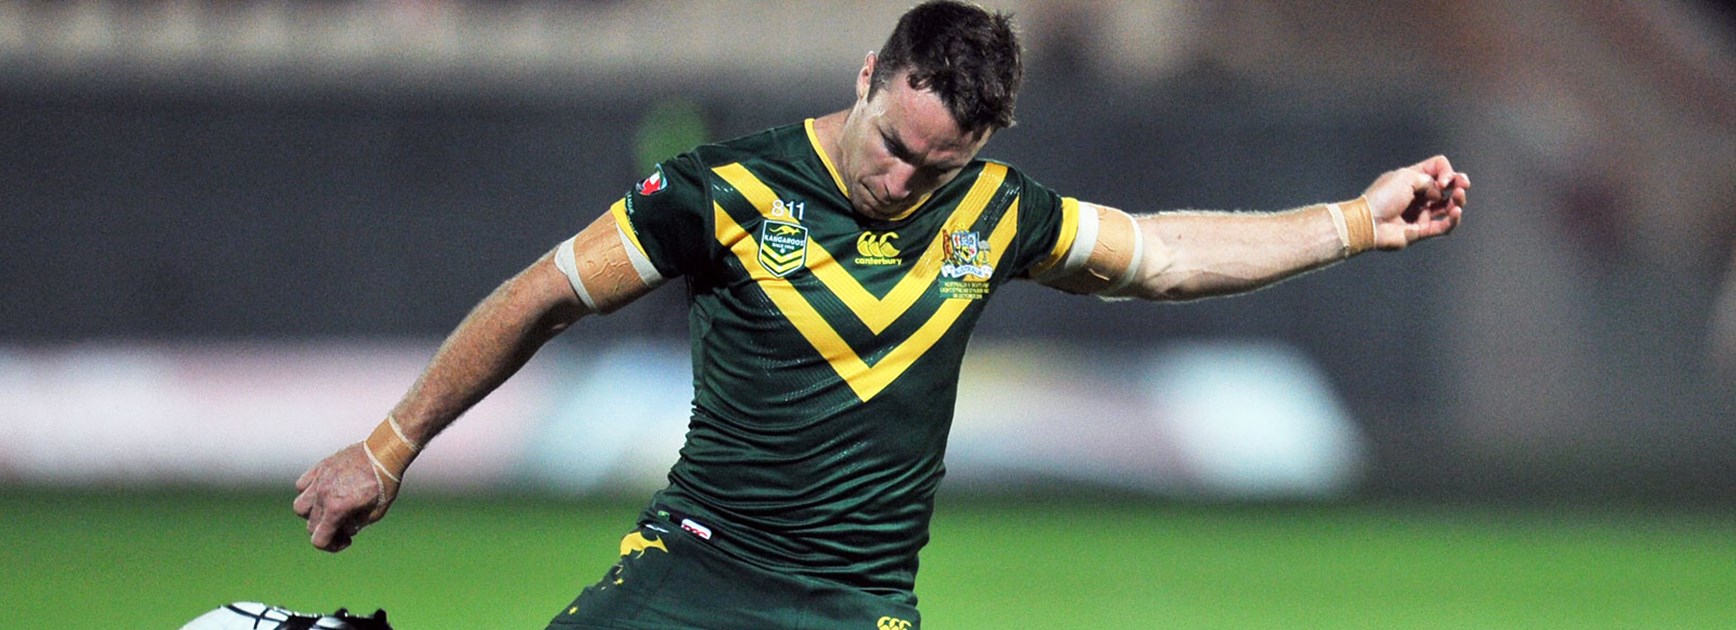 Five-eighth James Maloney booted seven goals in his Kangaroos debut.